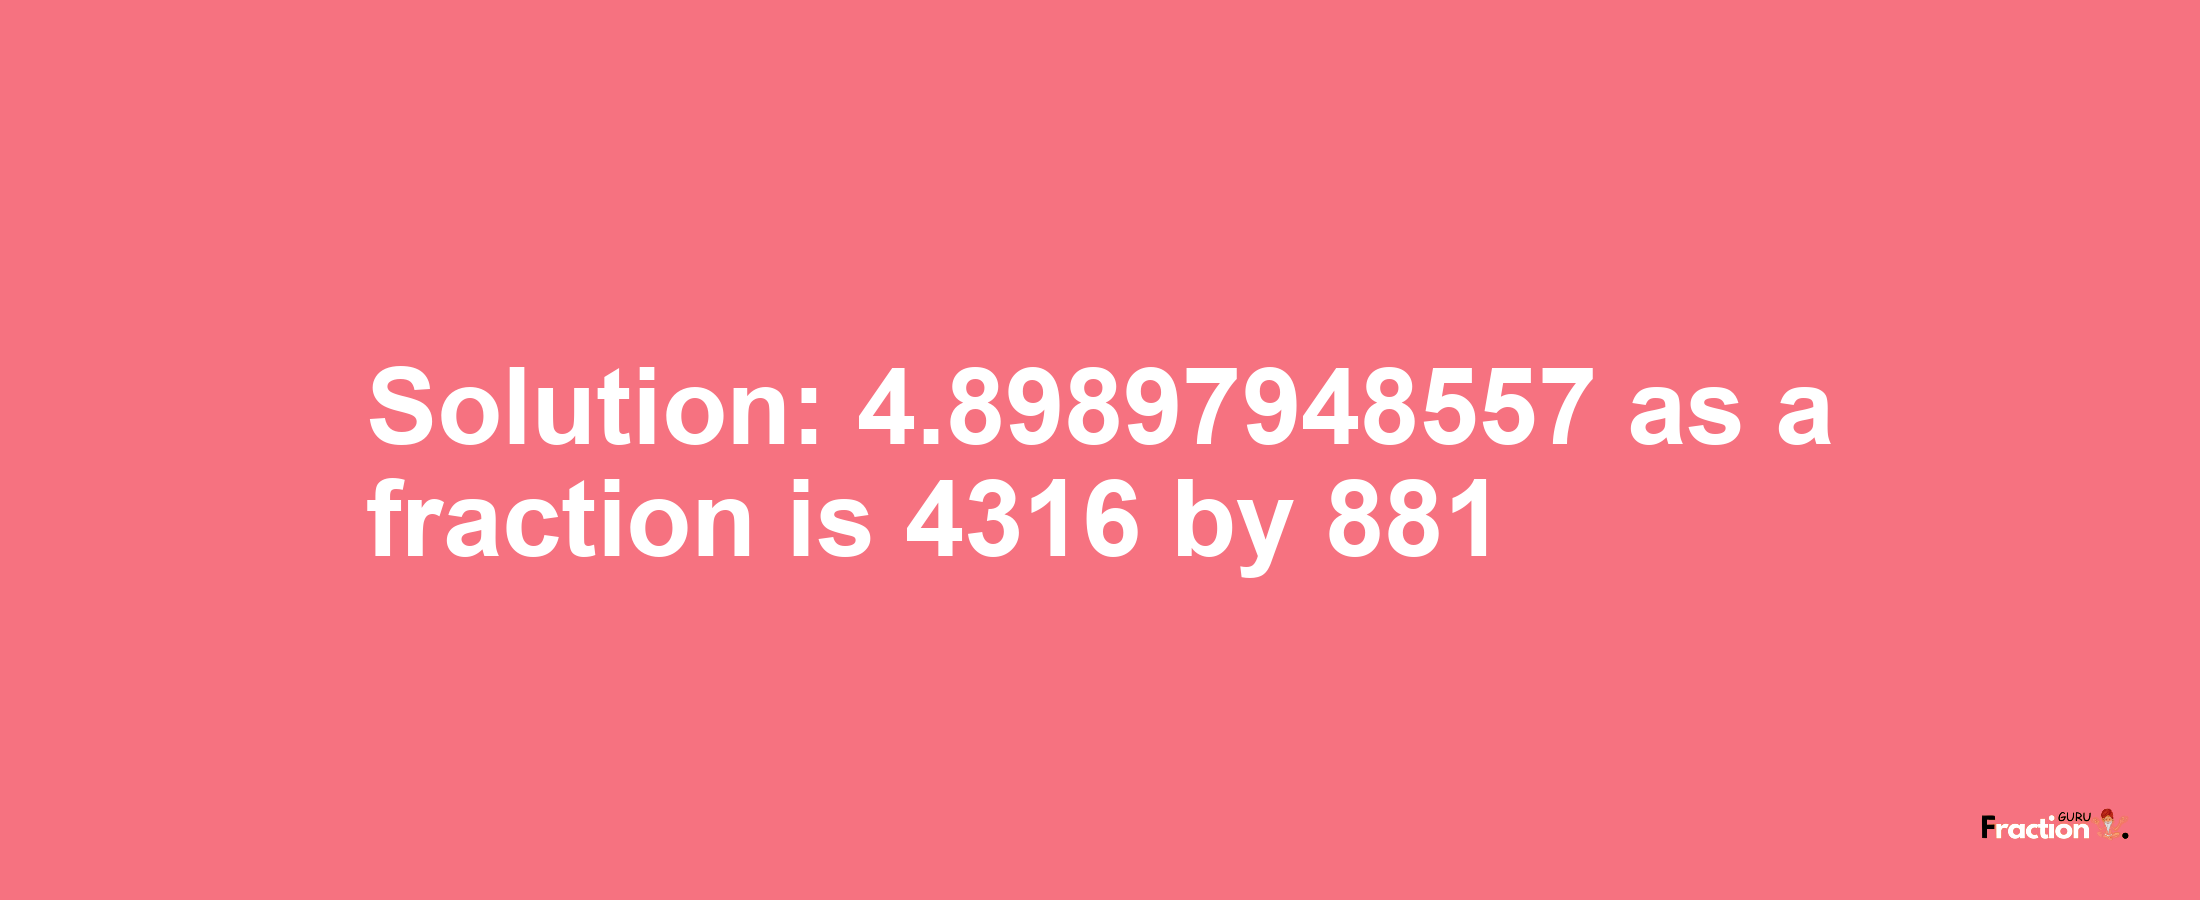 Solution:4.89897948557 as a fraction is 4316/881